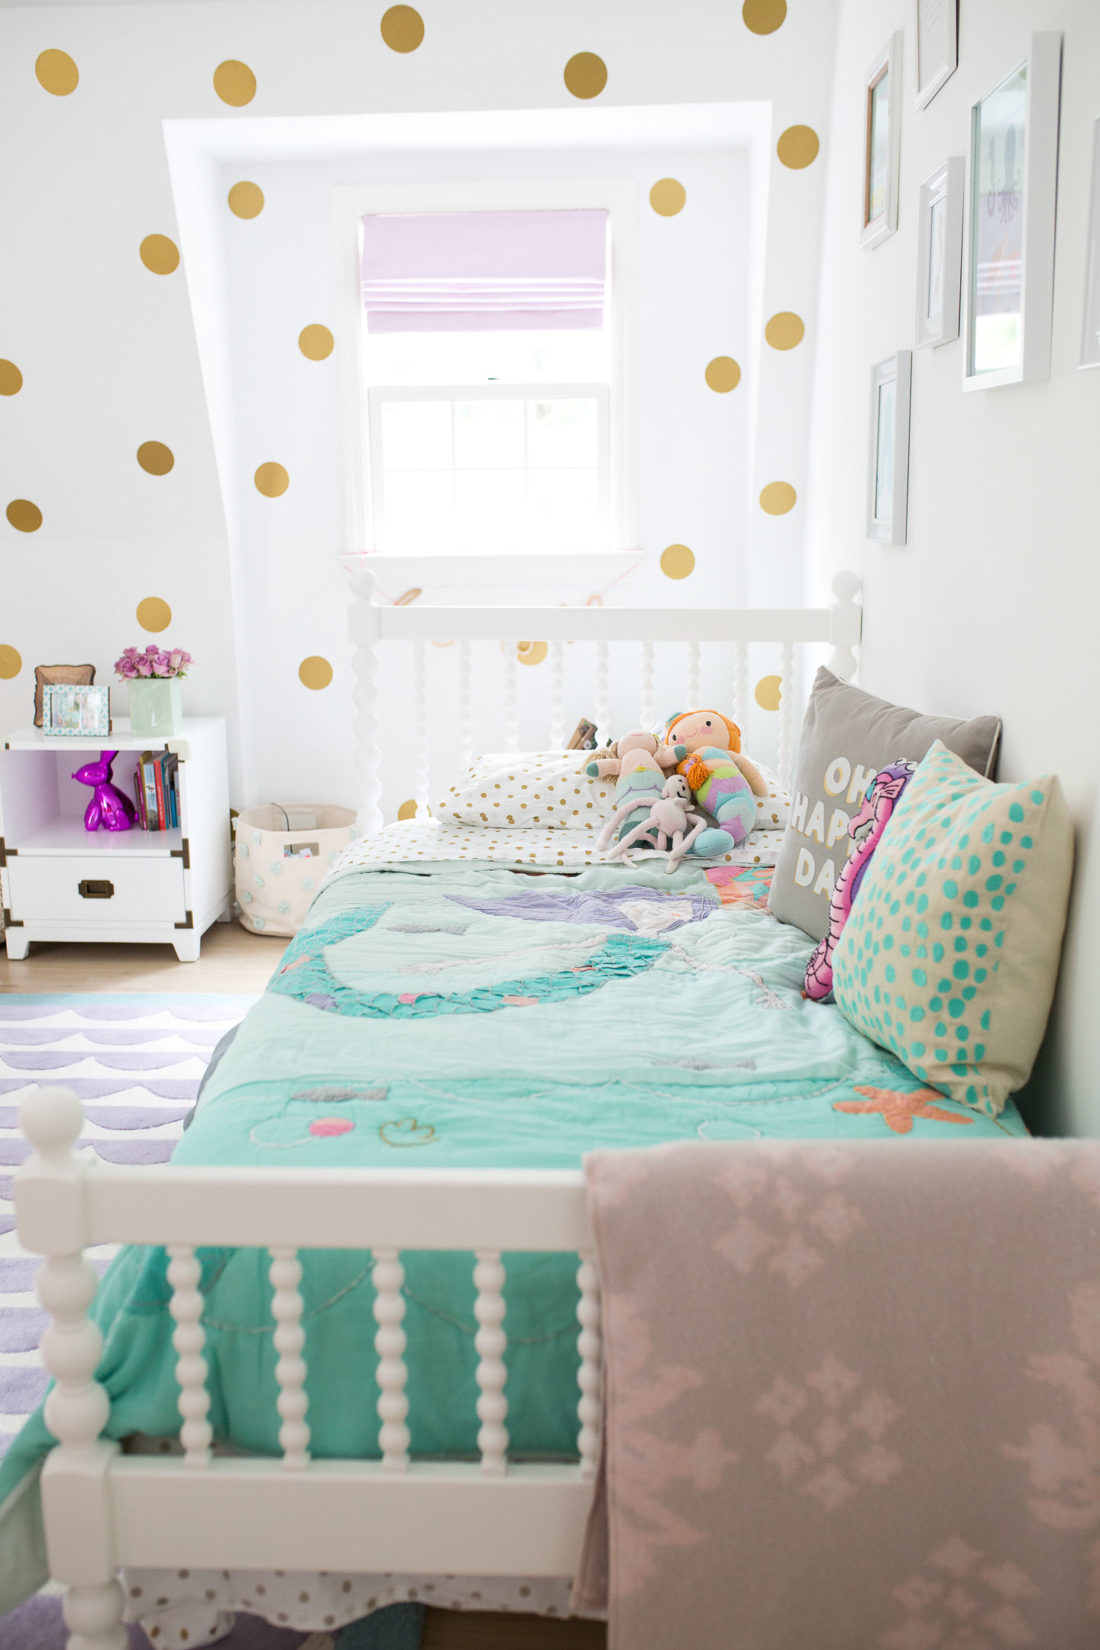 Eva Amurri Martino shares the new design of her three year old daughter's Connecticut mermaid bedroom with the added big girl bed instead of a crib